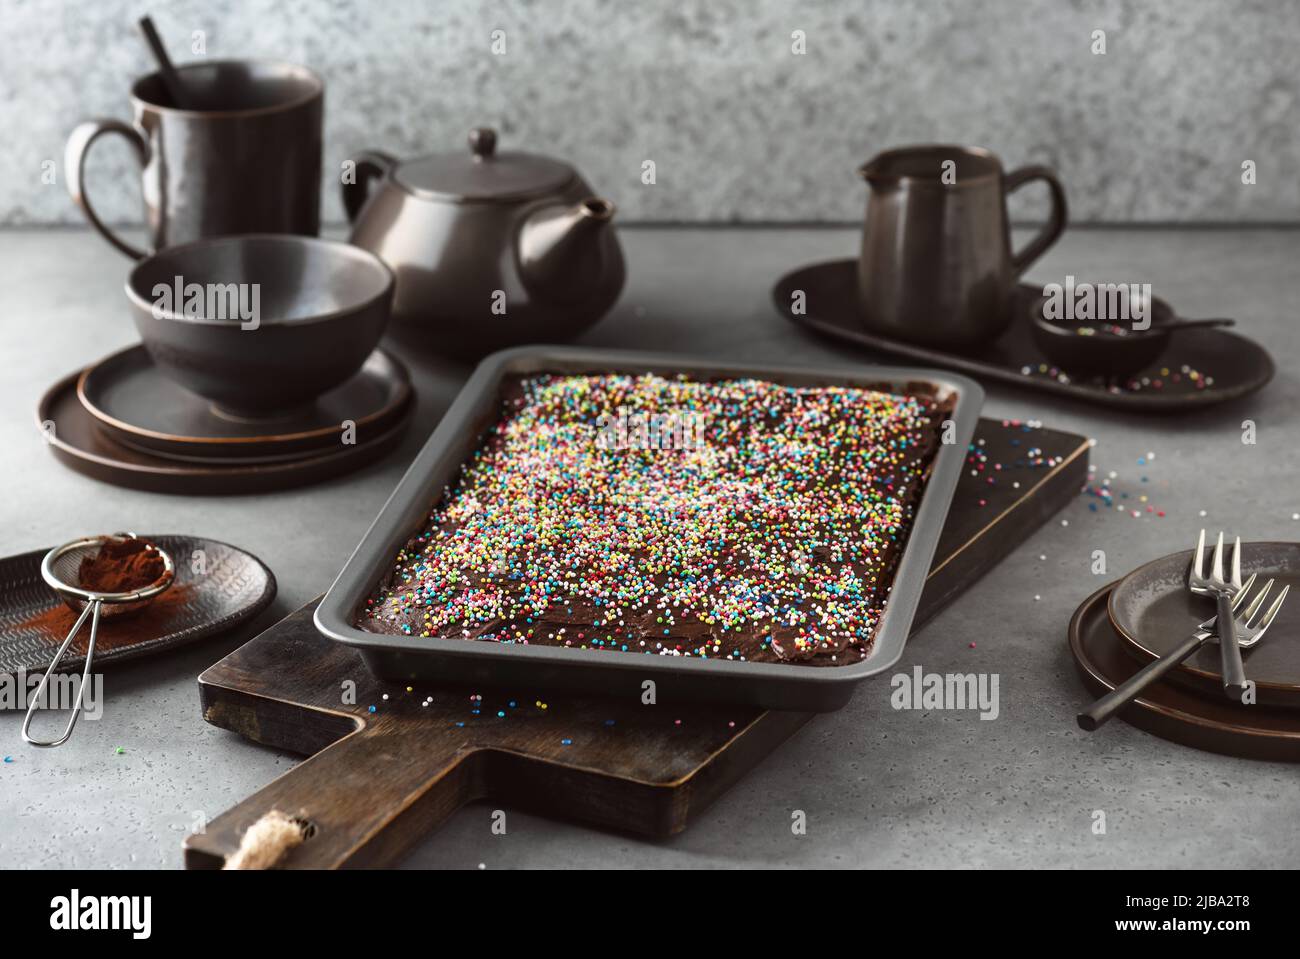 Fresh baked cake covered with dark chocolate icing and colorful sprinkles in a baking pan. Homemade sweet food concept. Selective focus. Stock Photo